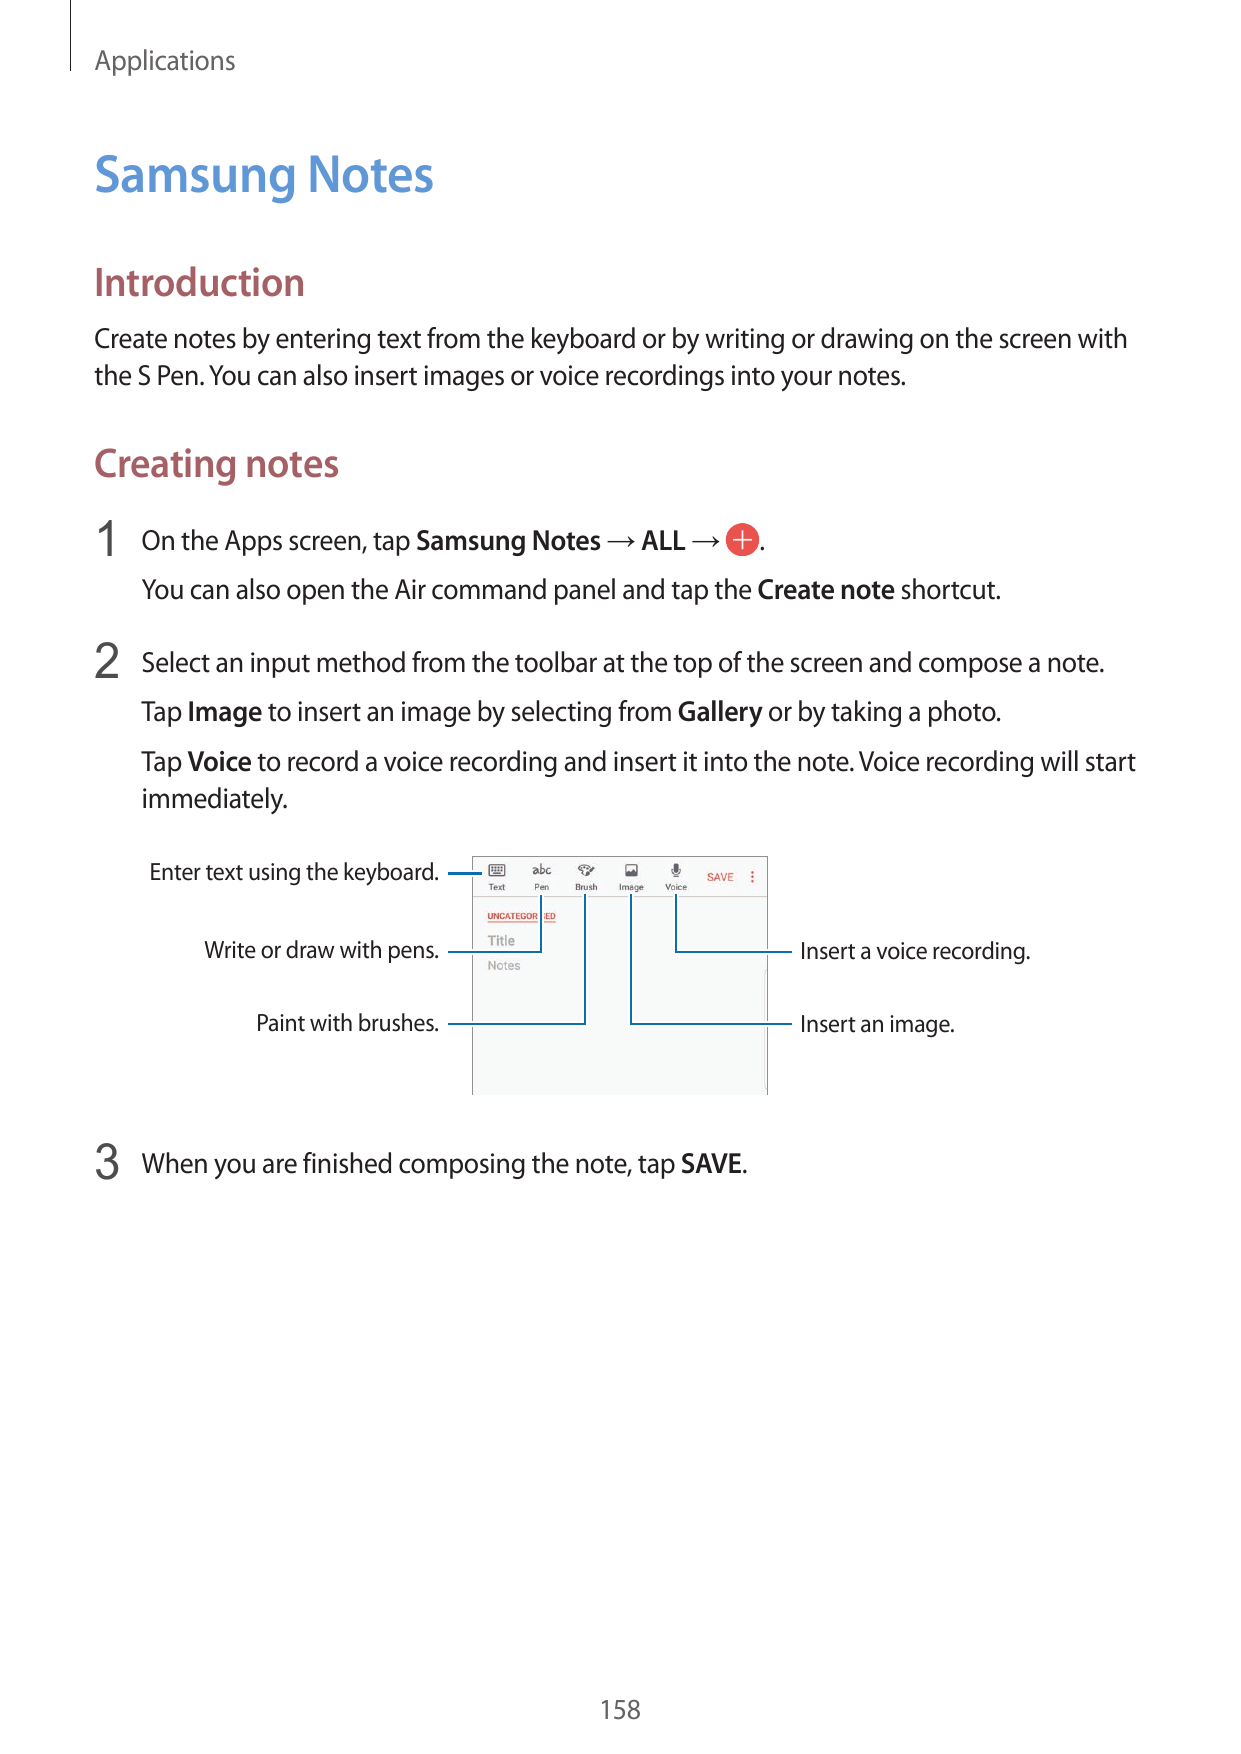 ApplicationsSamsung NotesIntroductionCreate notes by entering text from the keyboard or by writing or drawing on the screen with